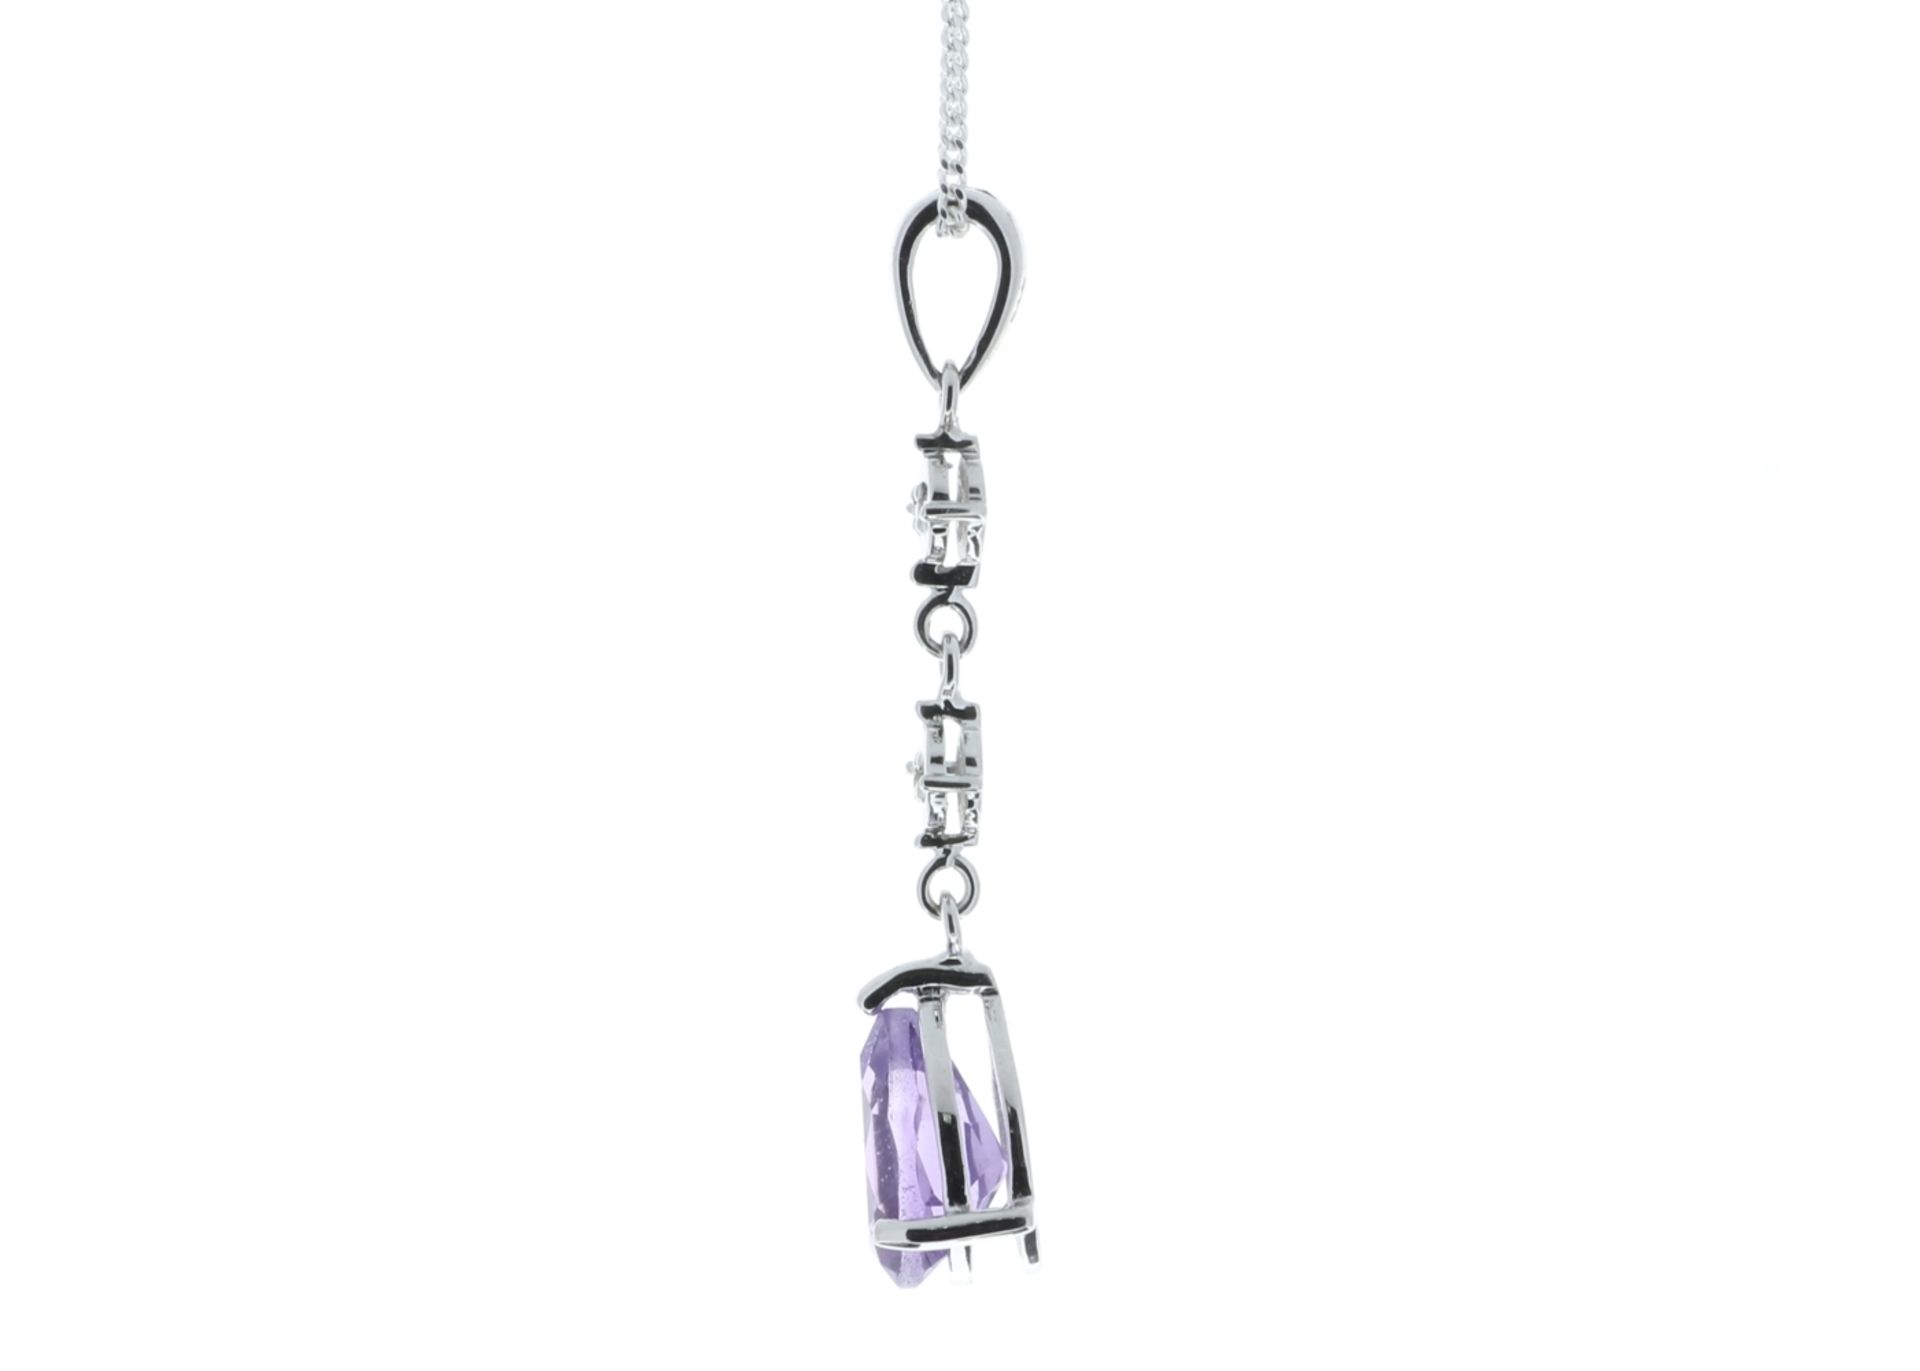 9ct White Gold Amethyst And Diamond Pendant - Valued By GIE £560.00 - This is classic pendant, - Image 3 of 5